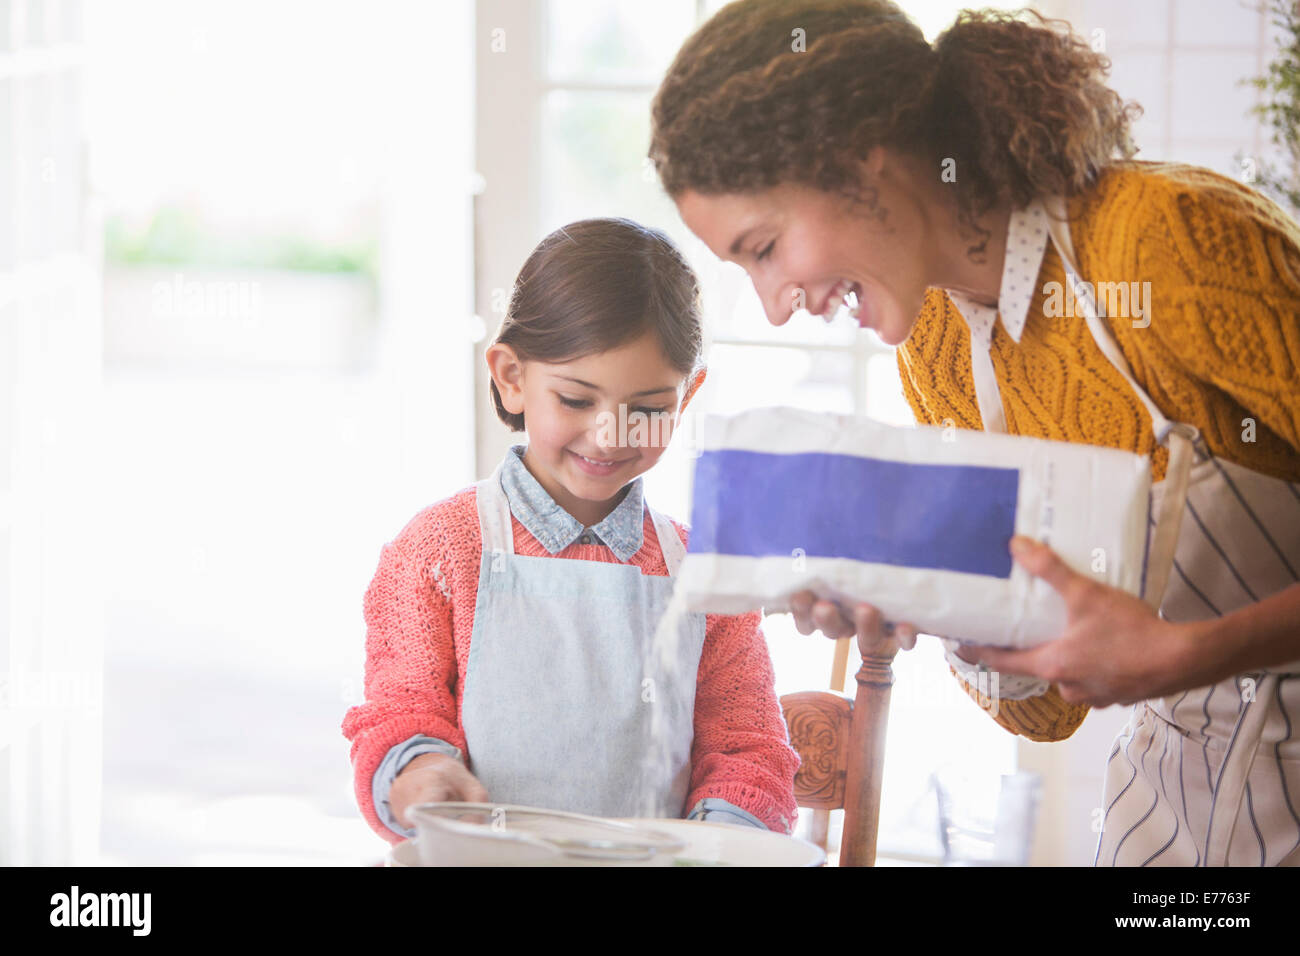 Mother and daughter baking together Stock Photo